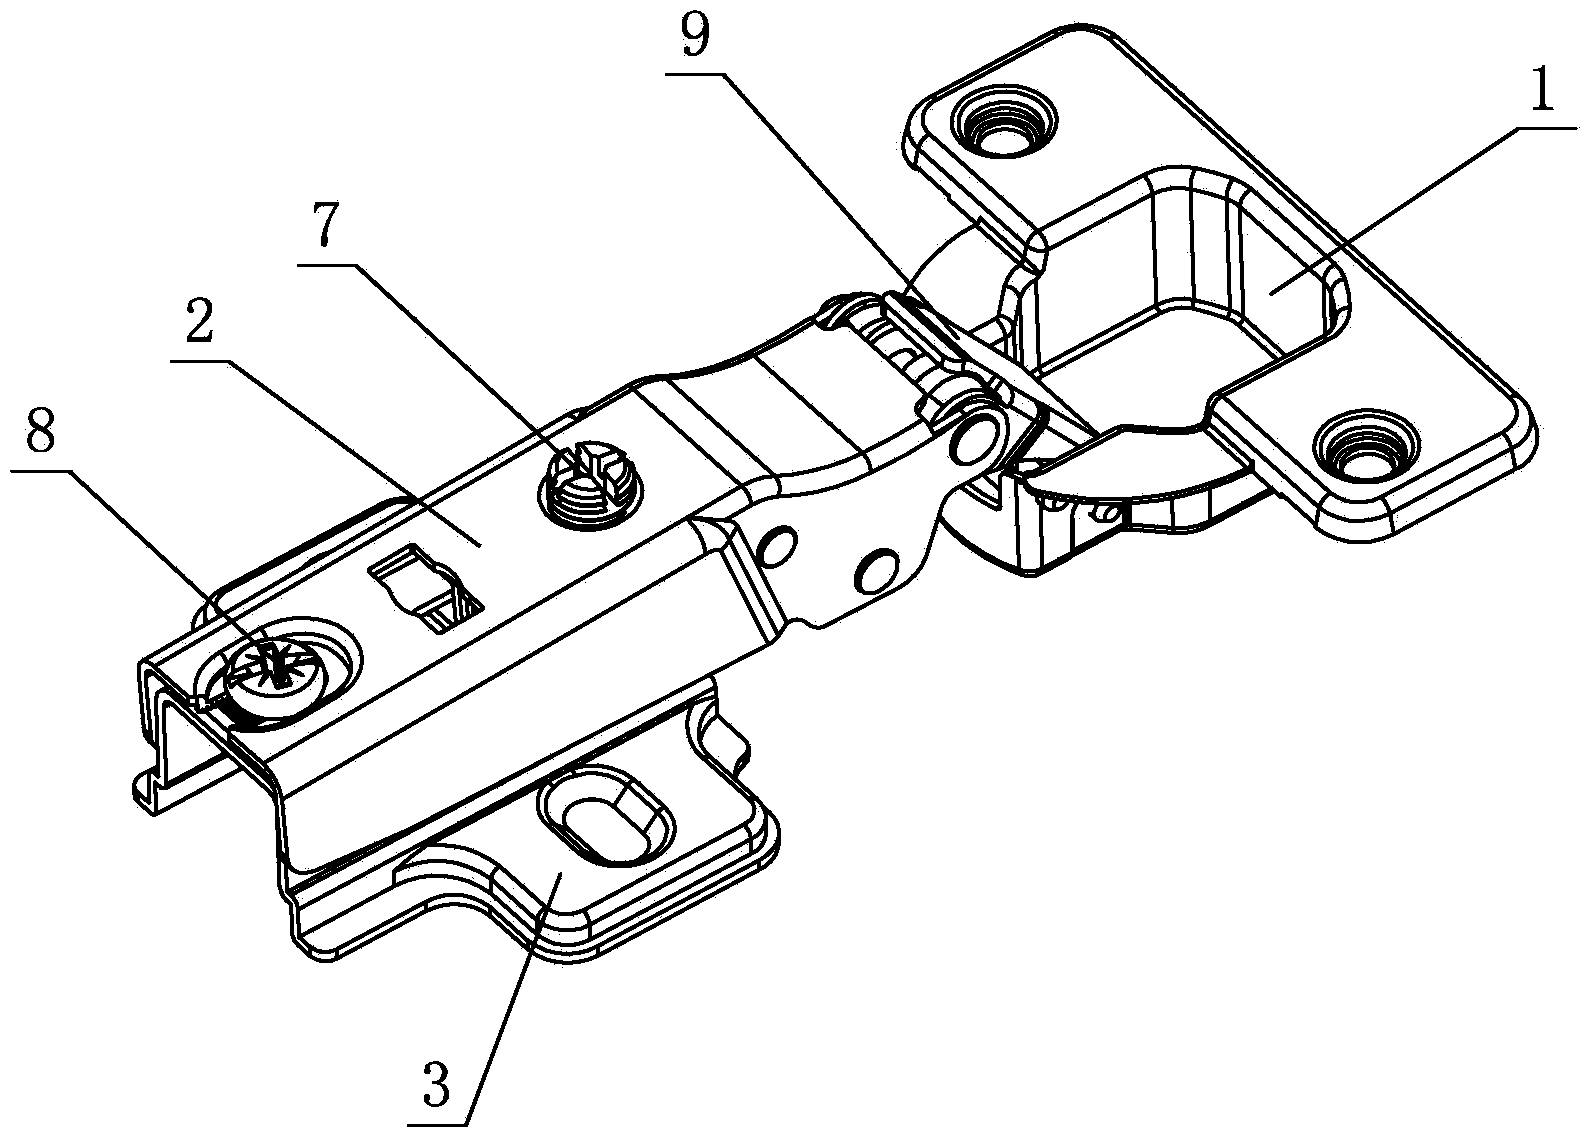 Hinge structure for quickly disassembling damper